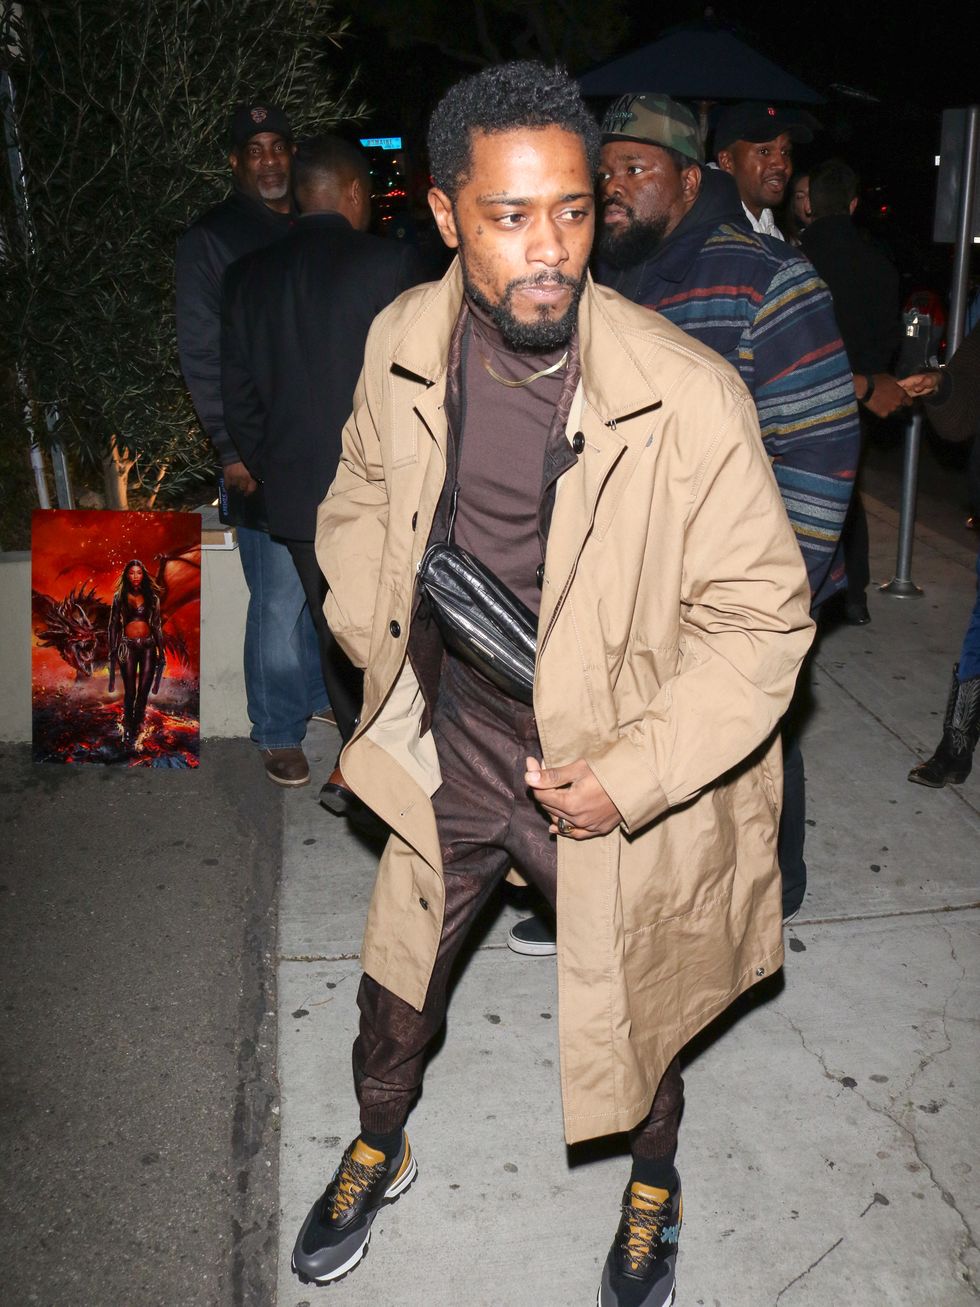 los angeles, ca february 22 lakeith stanfield is seen on february 22, 2019 in los angeles, california photo by gotpapbauer griffingc images